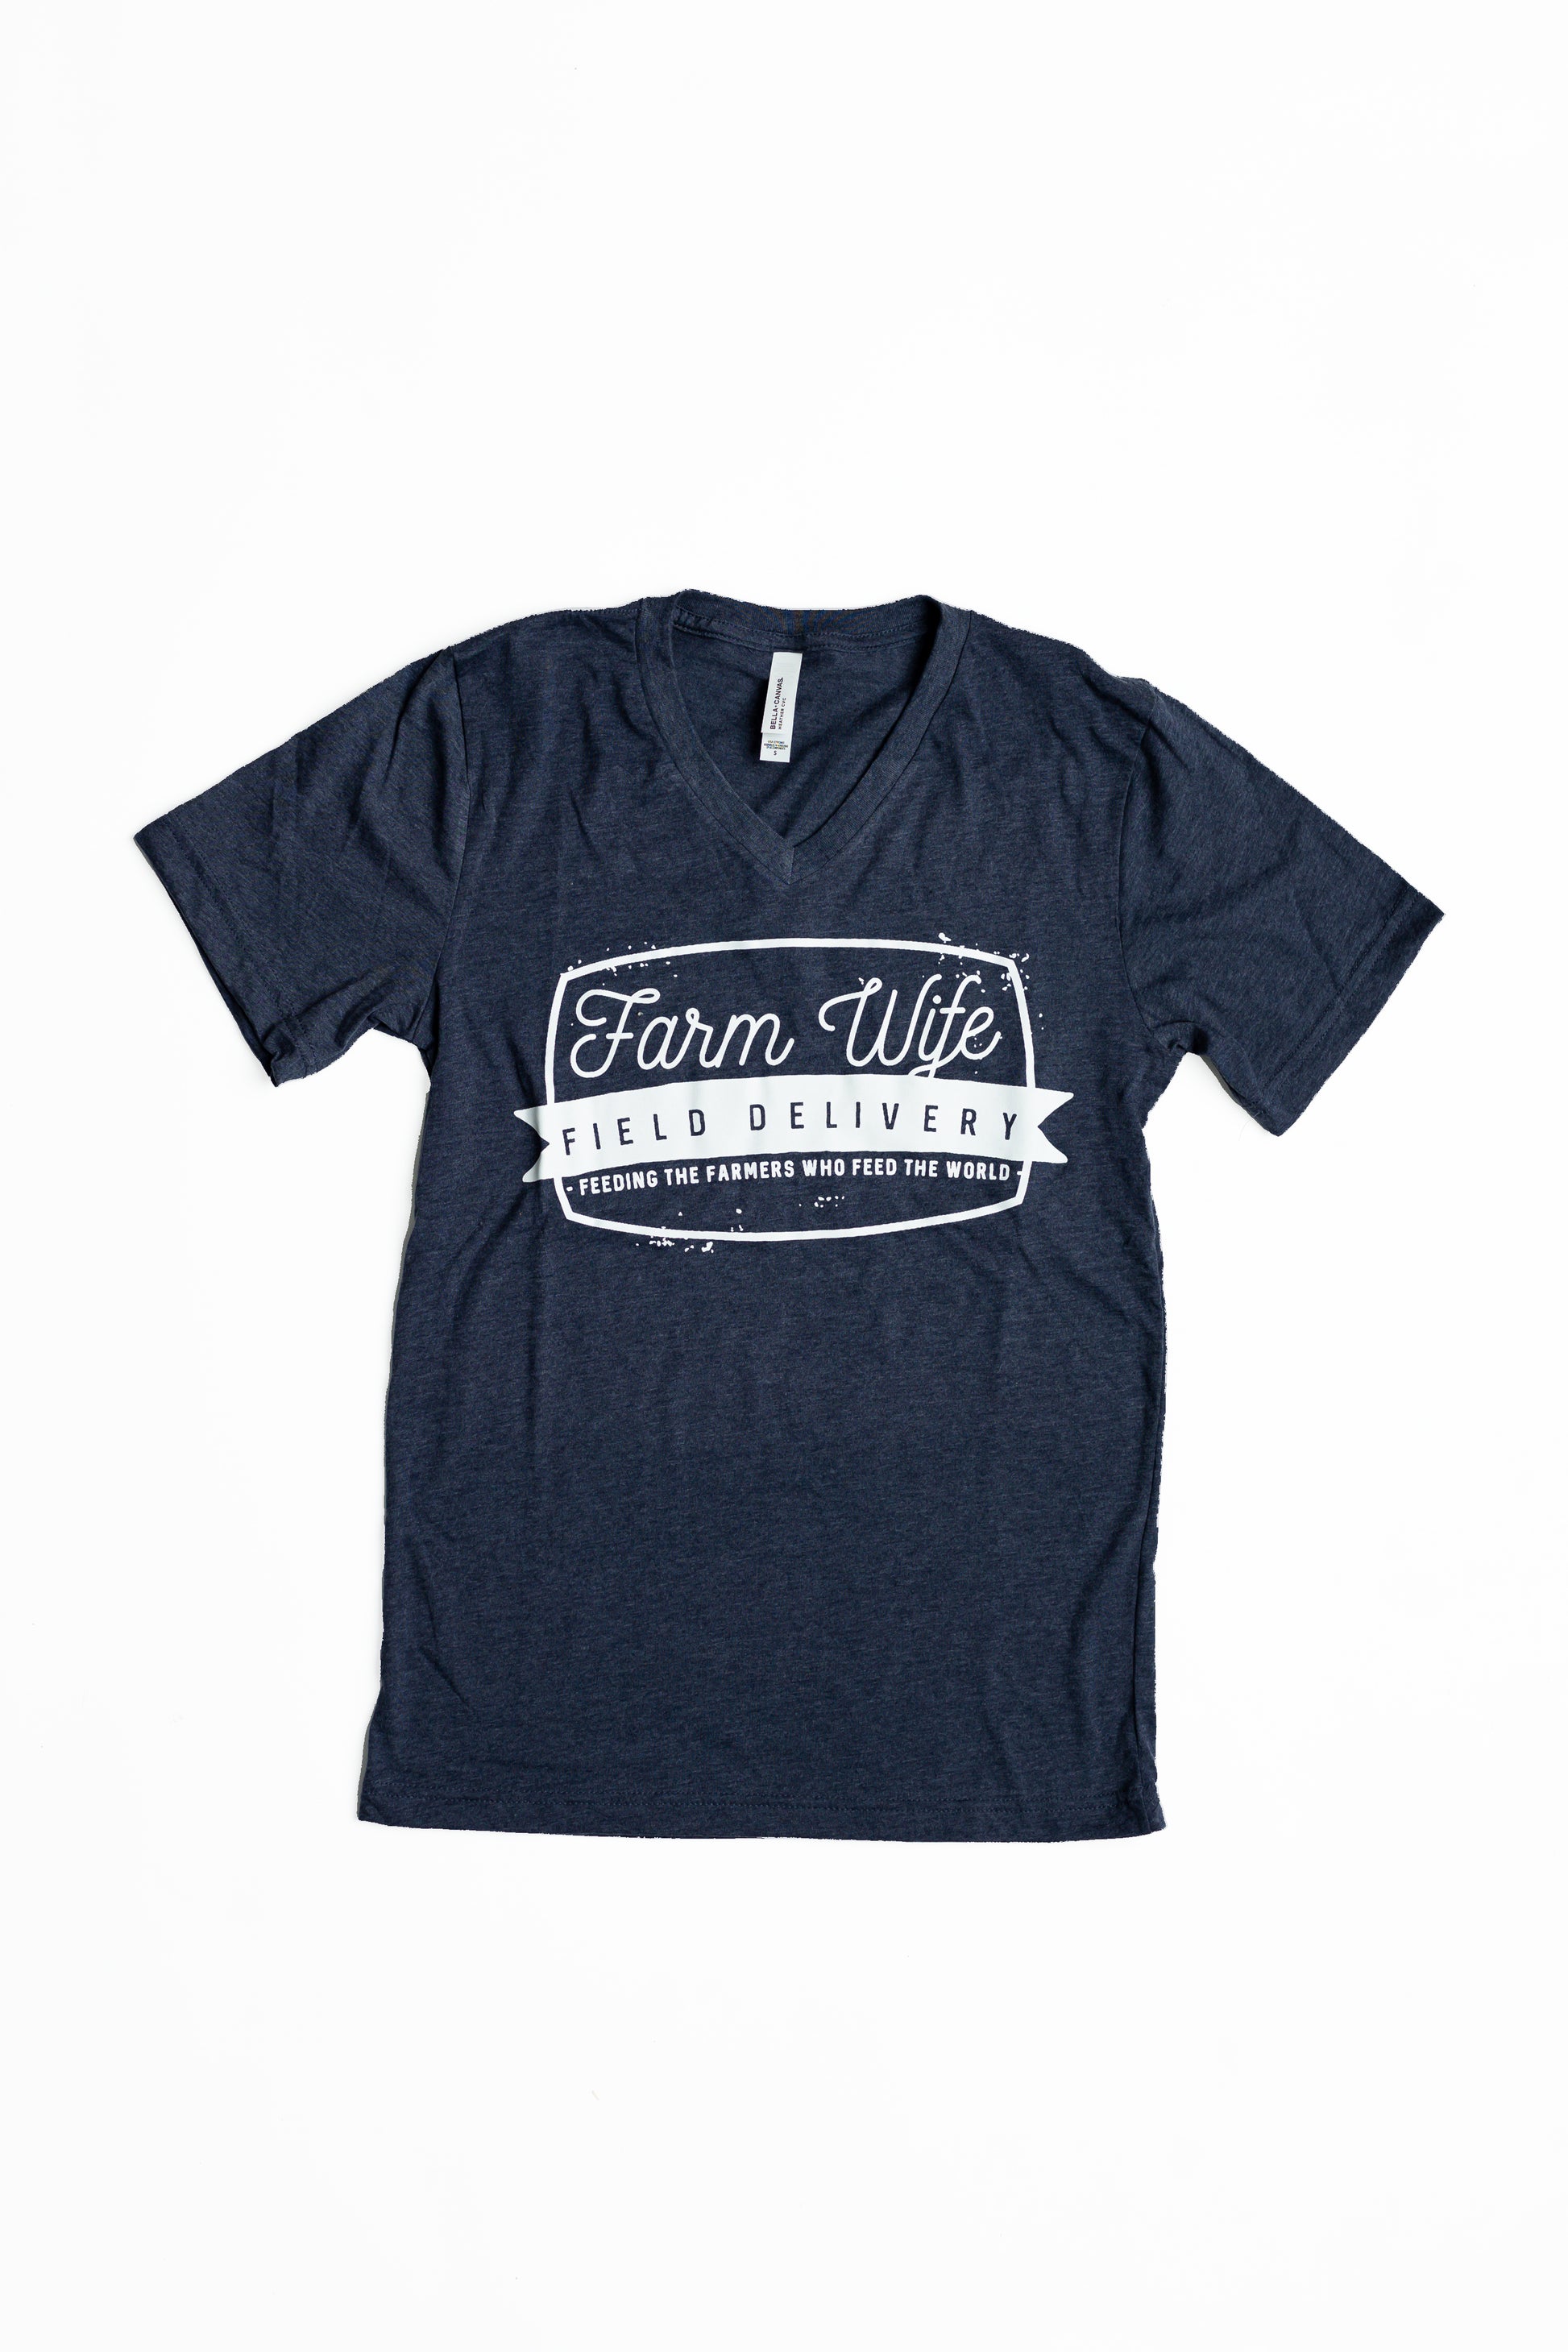 Full image of navy farm wife field delivery v-neck tee